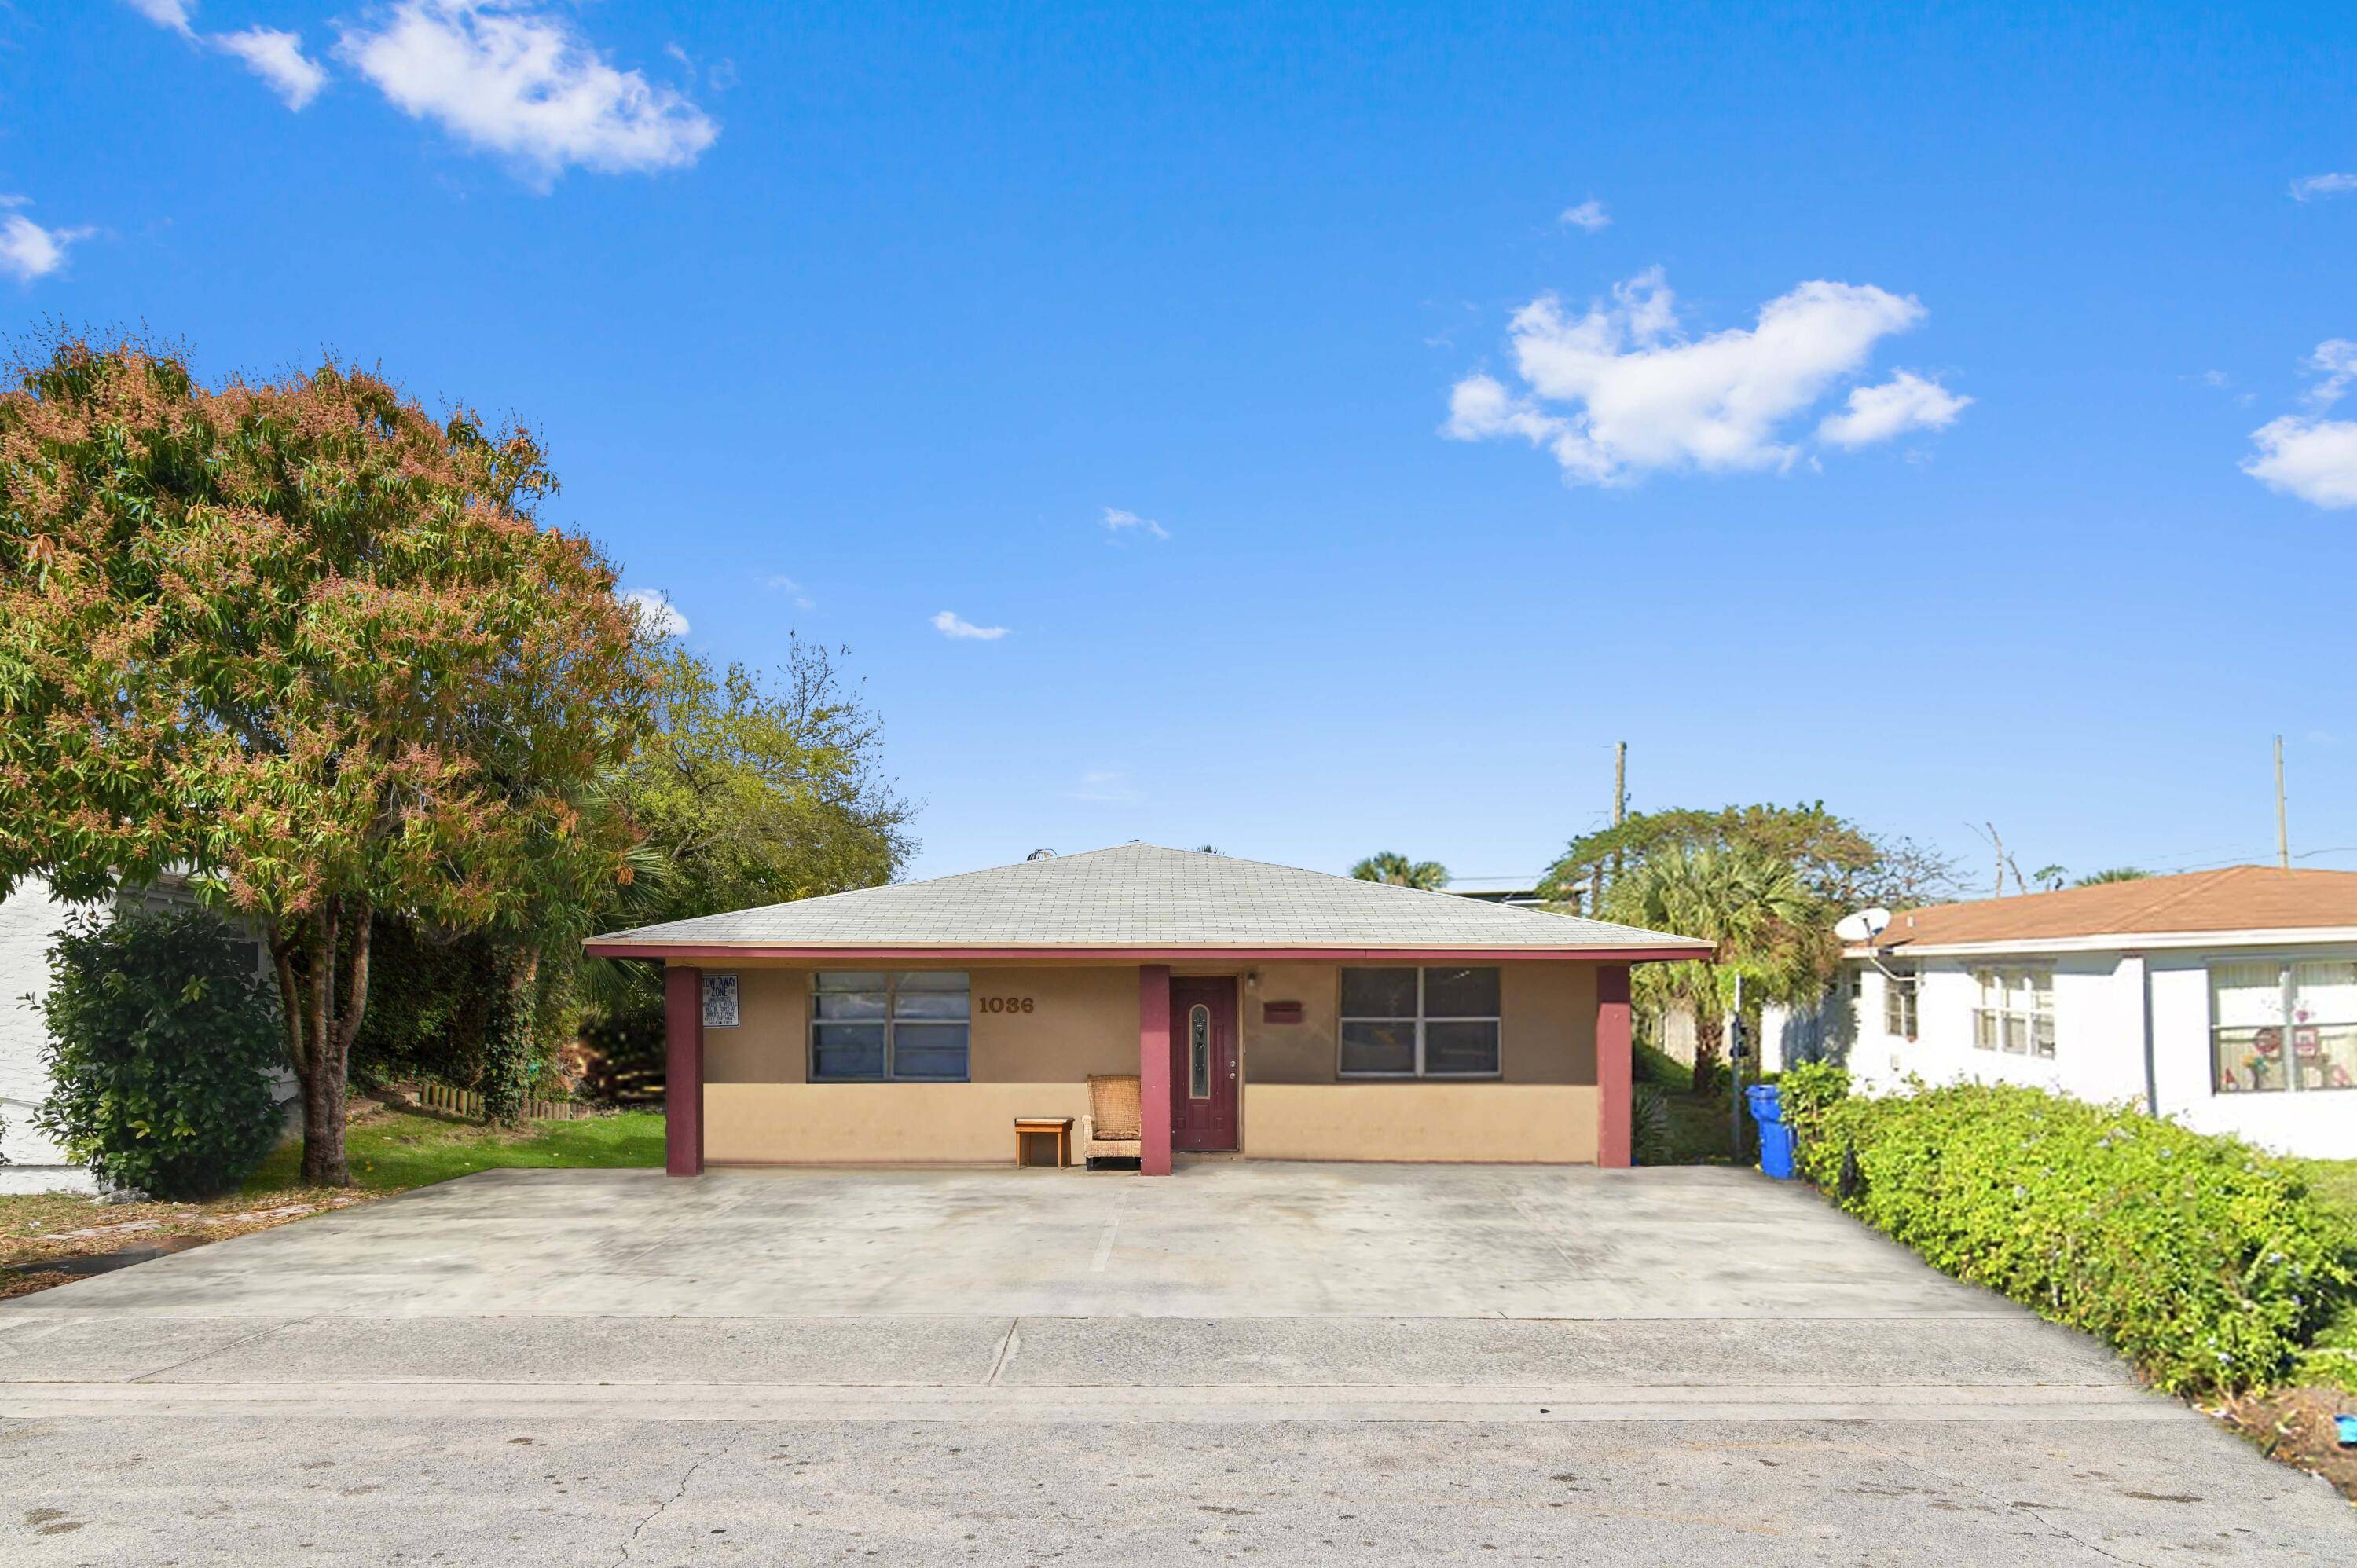 Don't miss the opportunity to add this one of a kind investment property to your portfolio with an impressive 2040 square feet of living space nestled in a non HOA ...